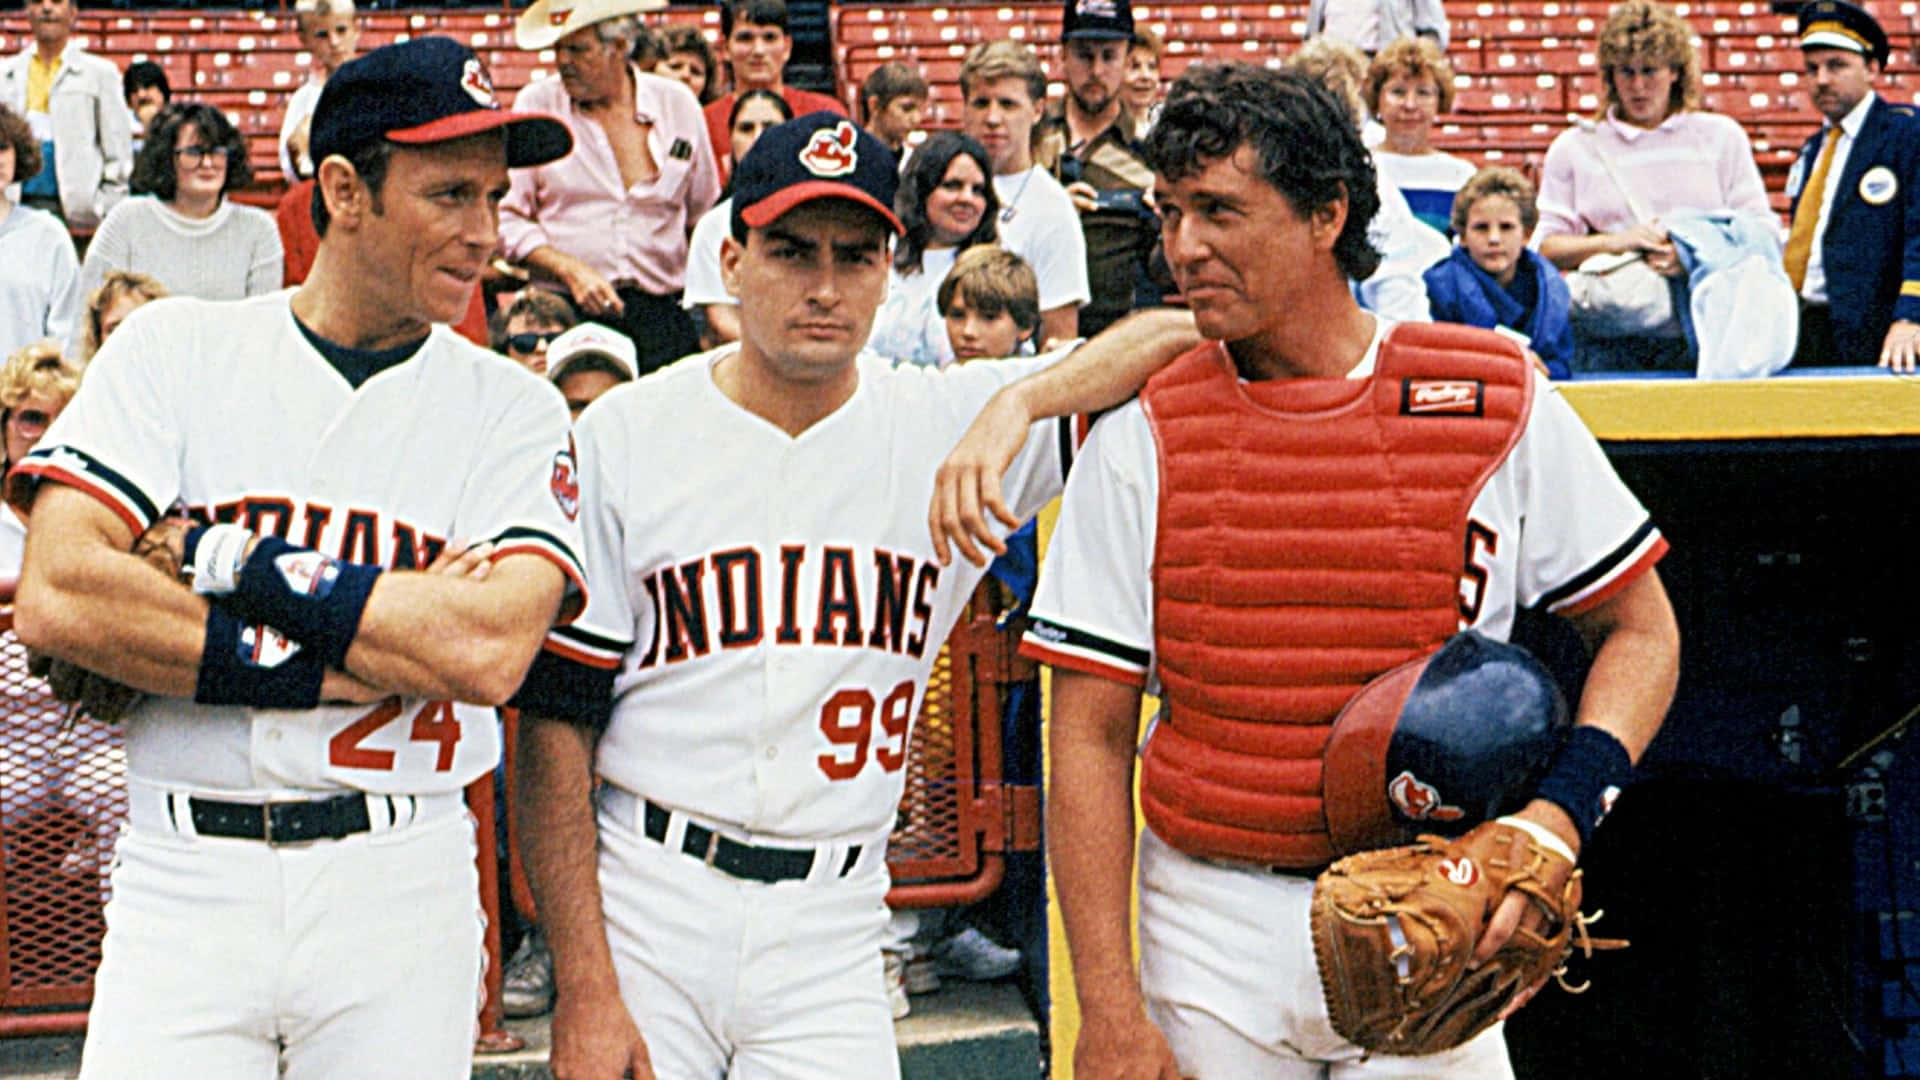 Download The Cast of Major League Movie Wallpaper